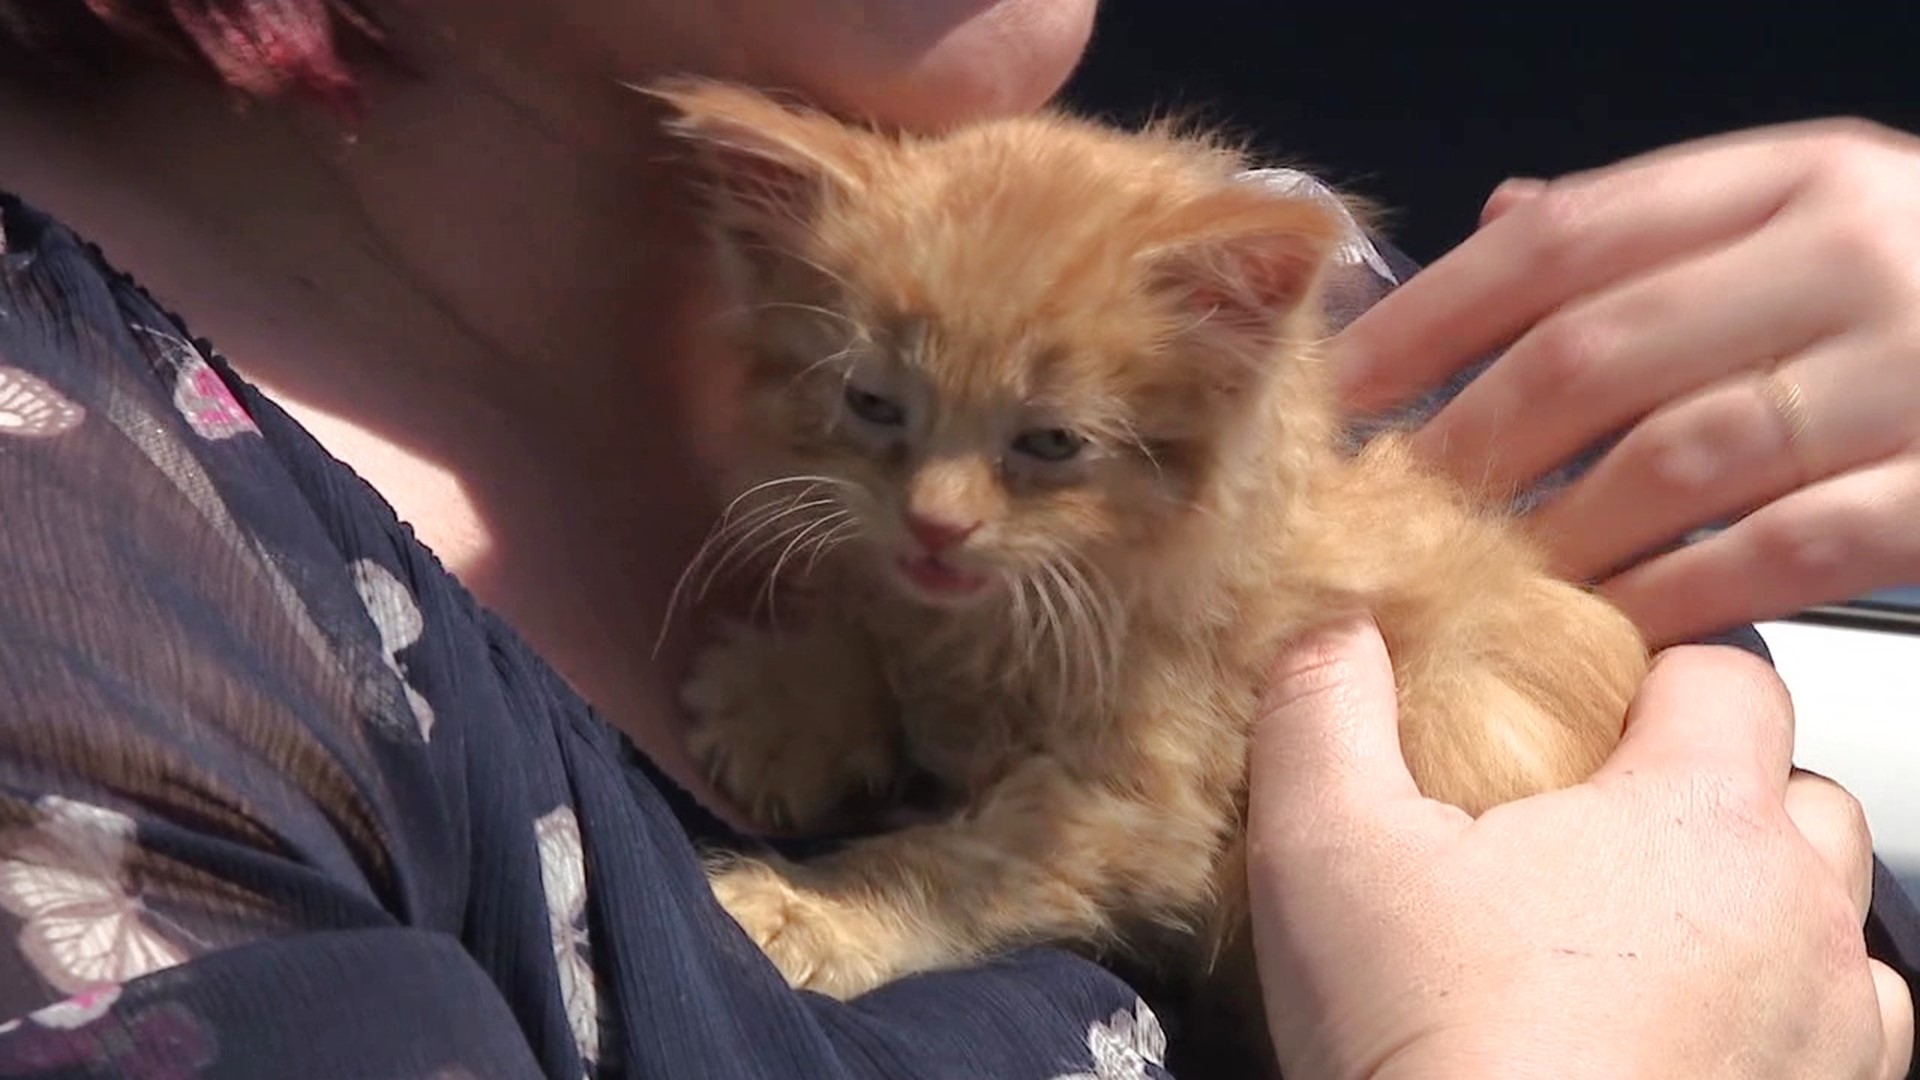 A family shopping trip to a Walmart in Columbia County saved the life of a 6-week-old kitten this week.